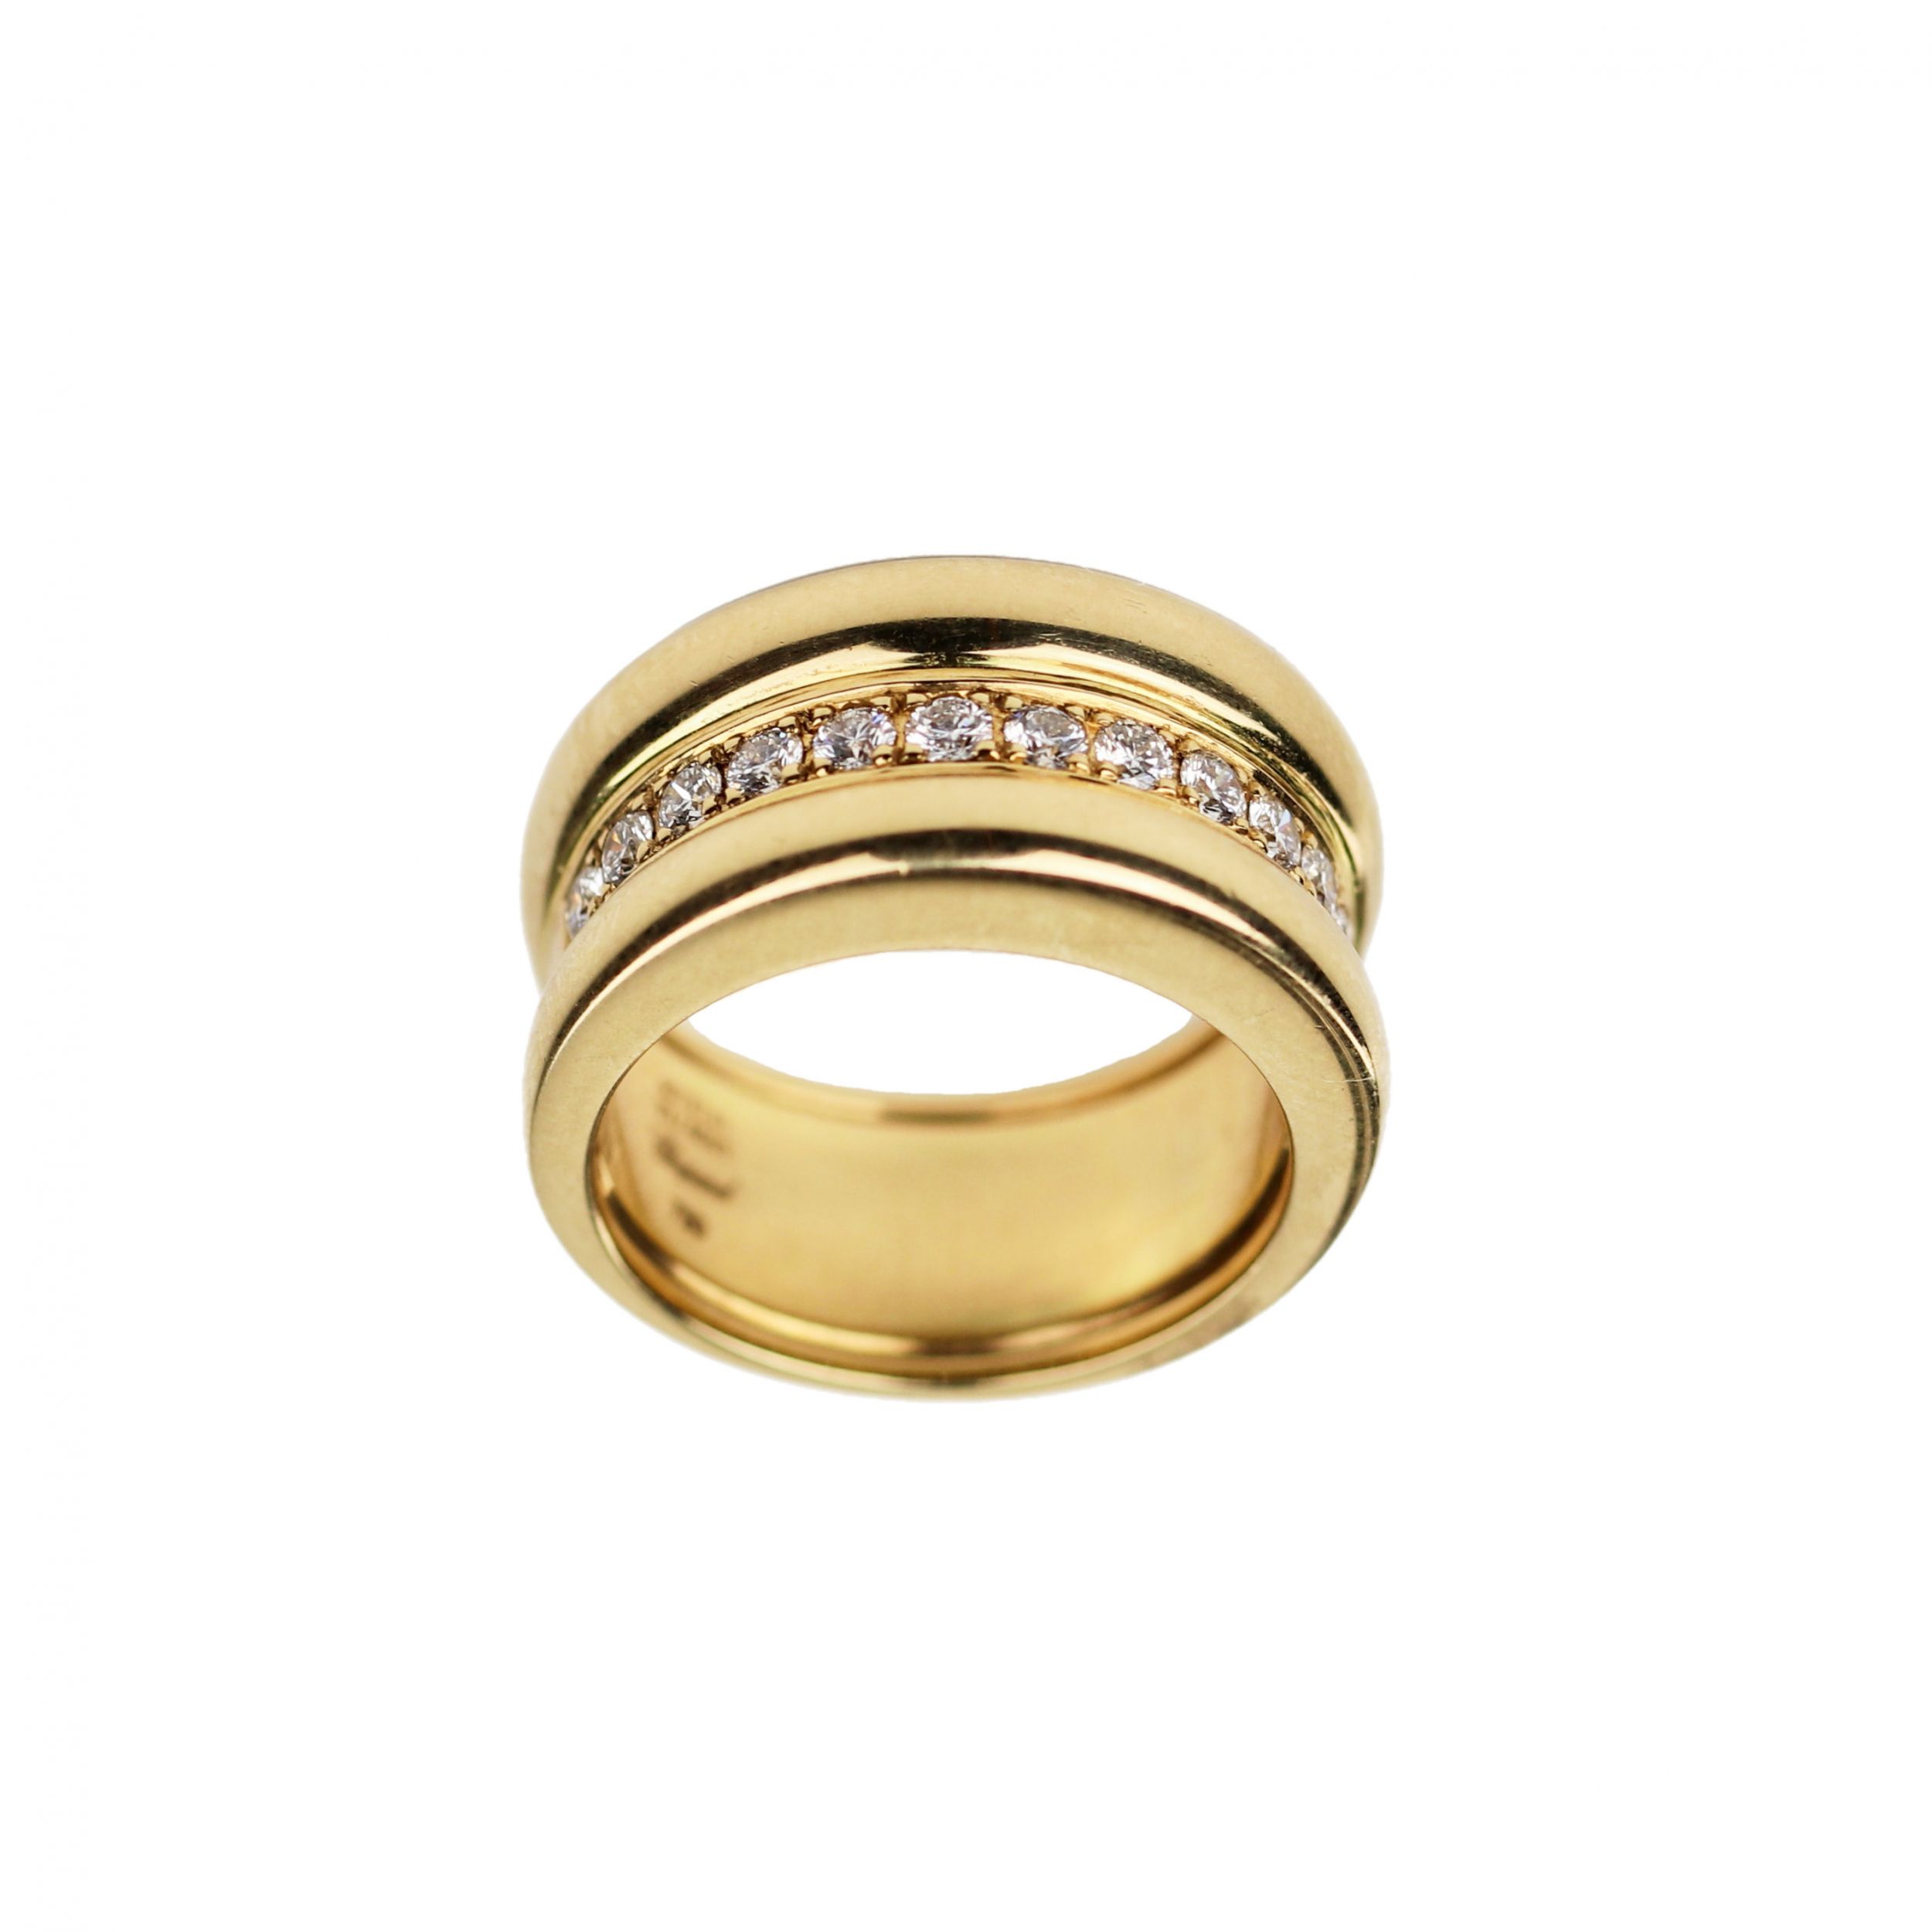 Chopard-gold-ring-with-diamonds-